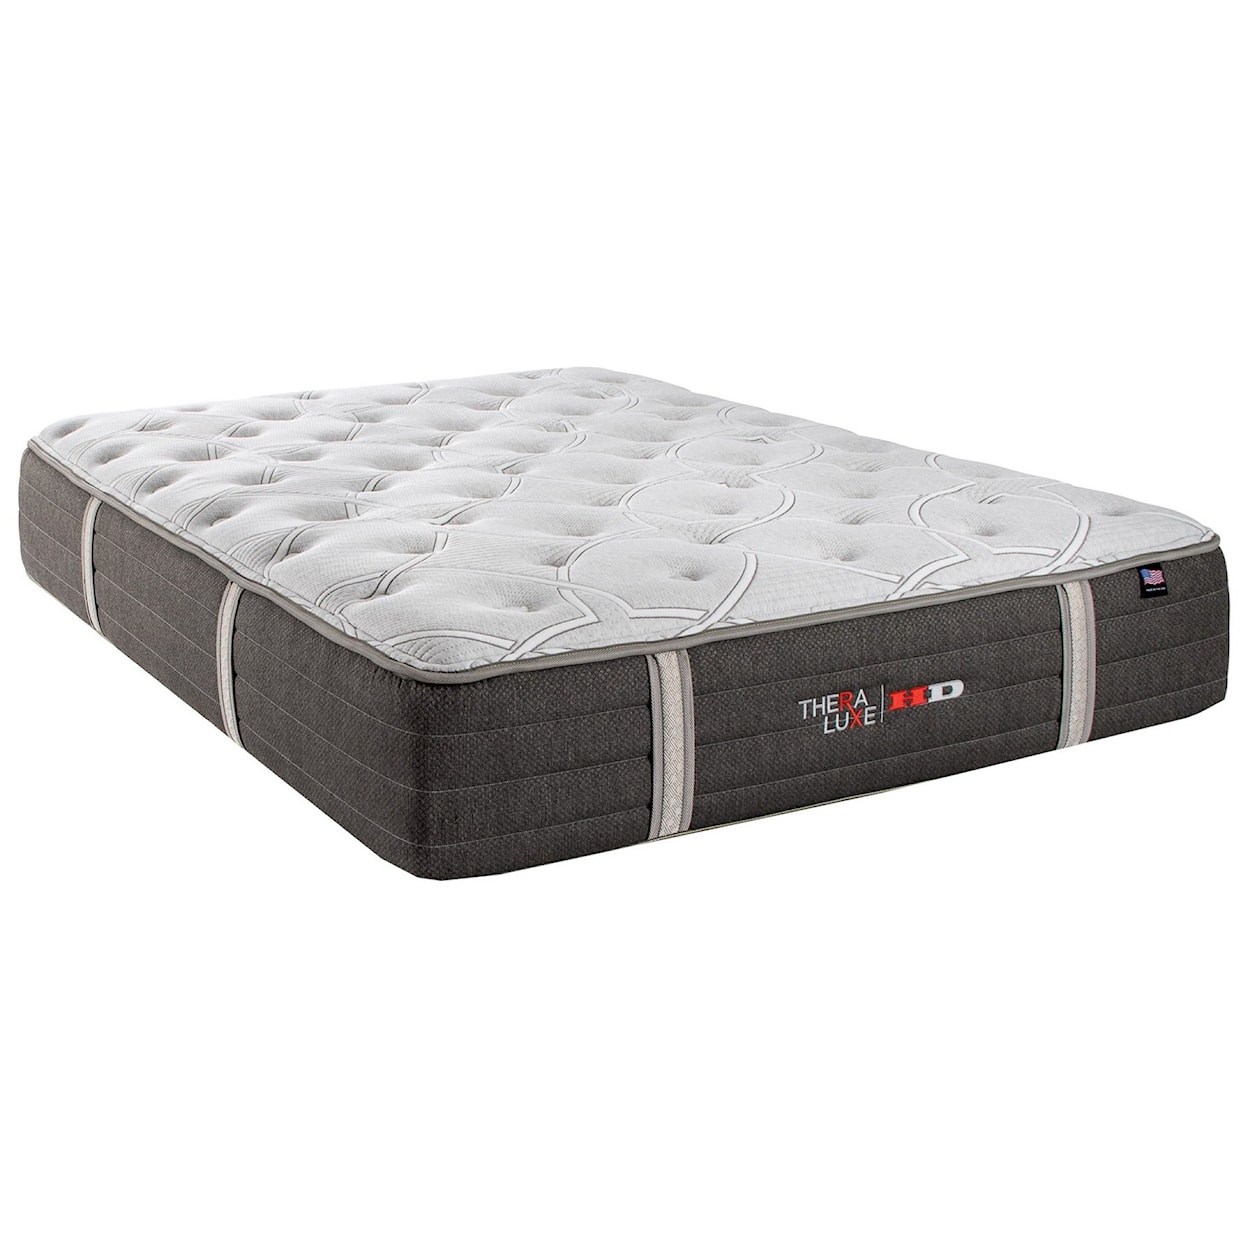 Therapedic Theraluxe Sequoia Queen Plush Pocketed Coil Mattress